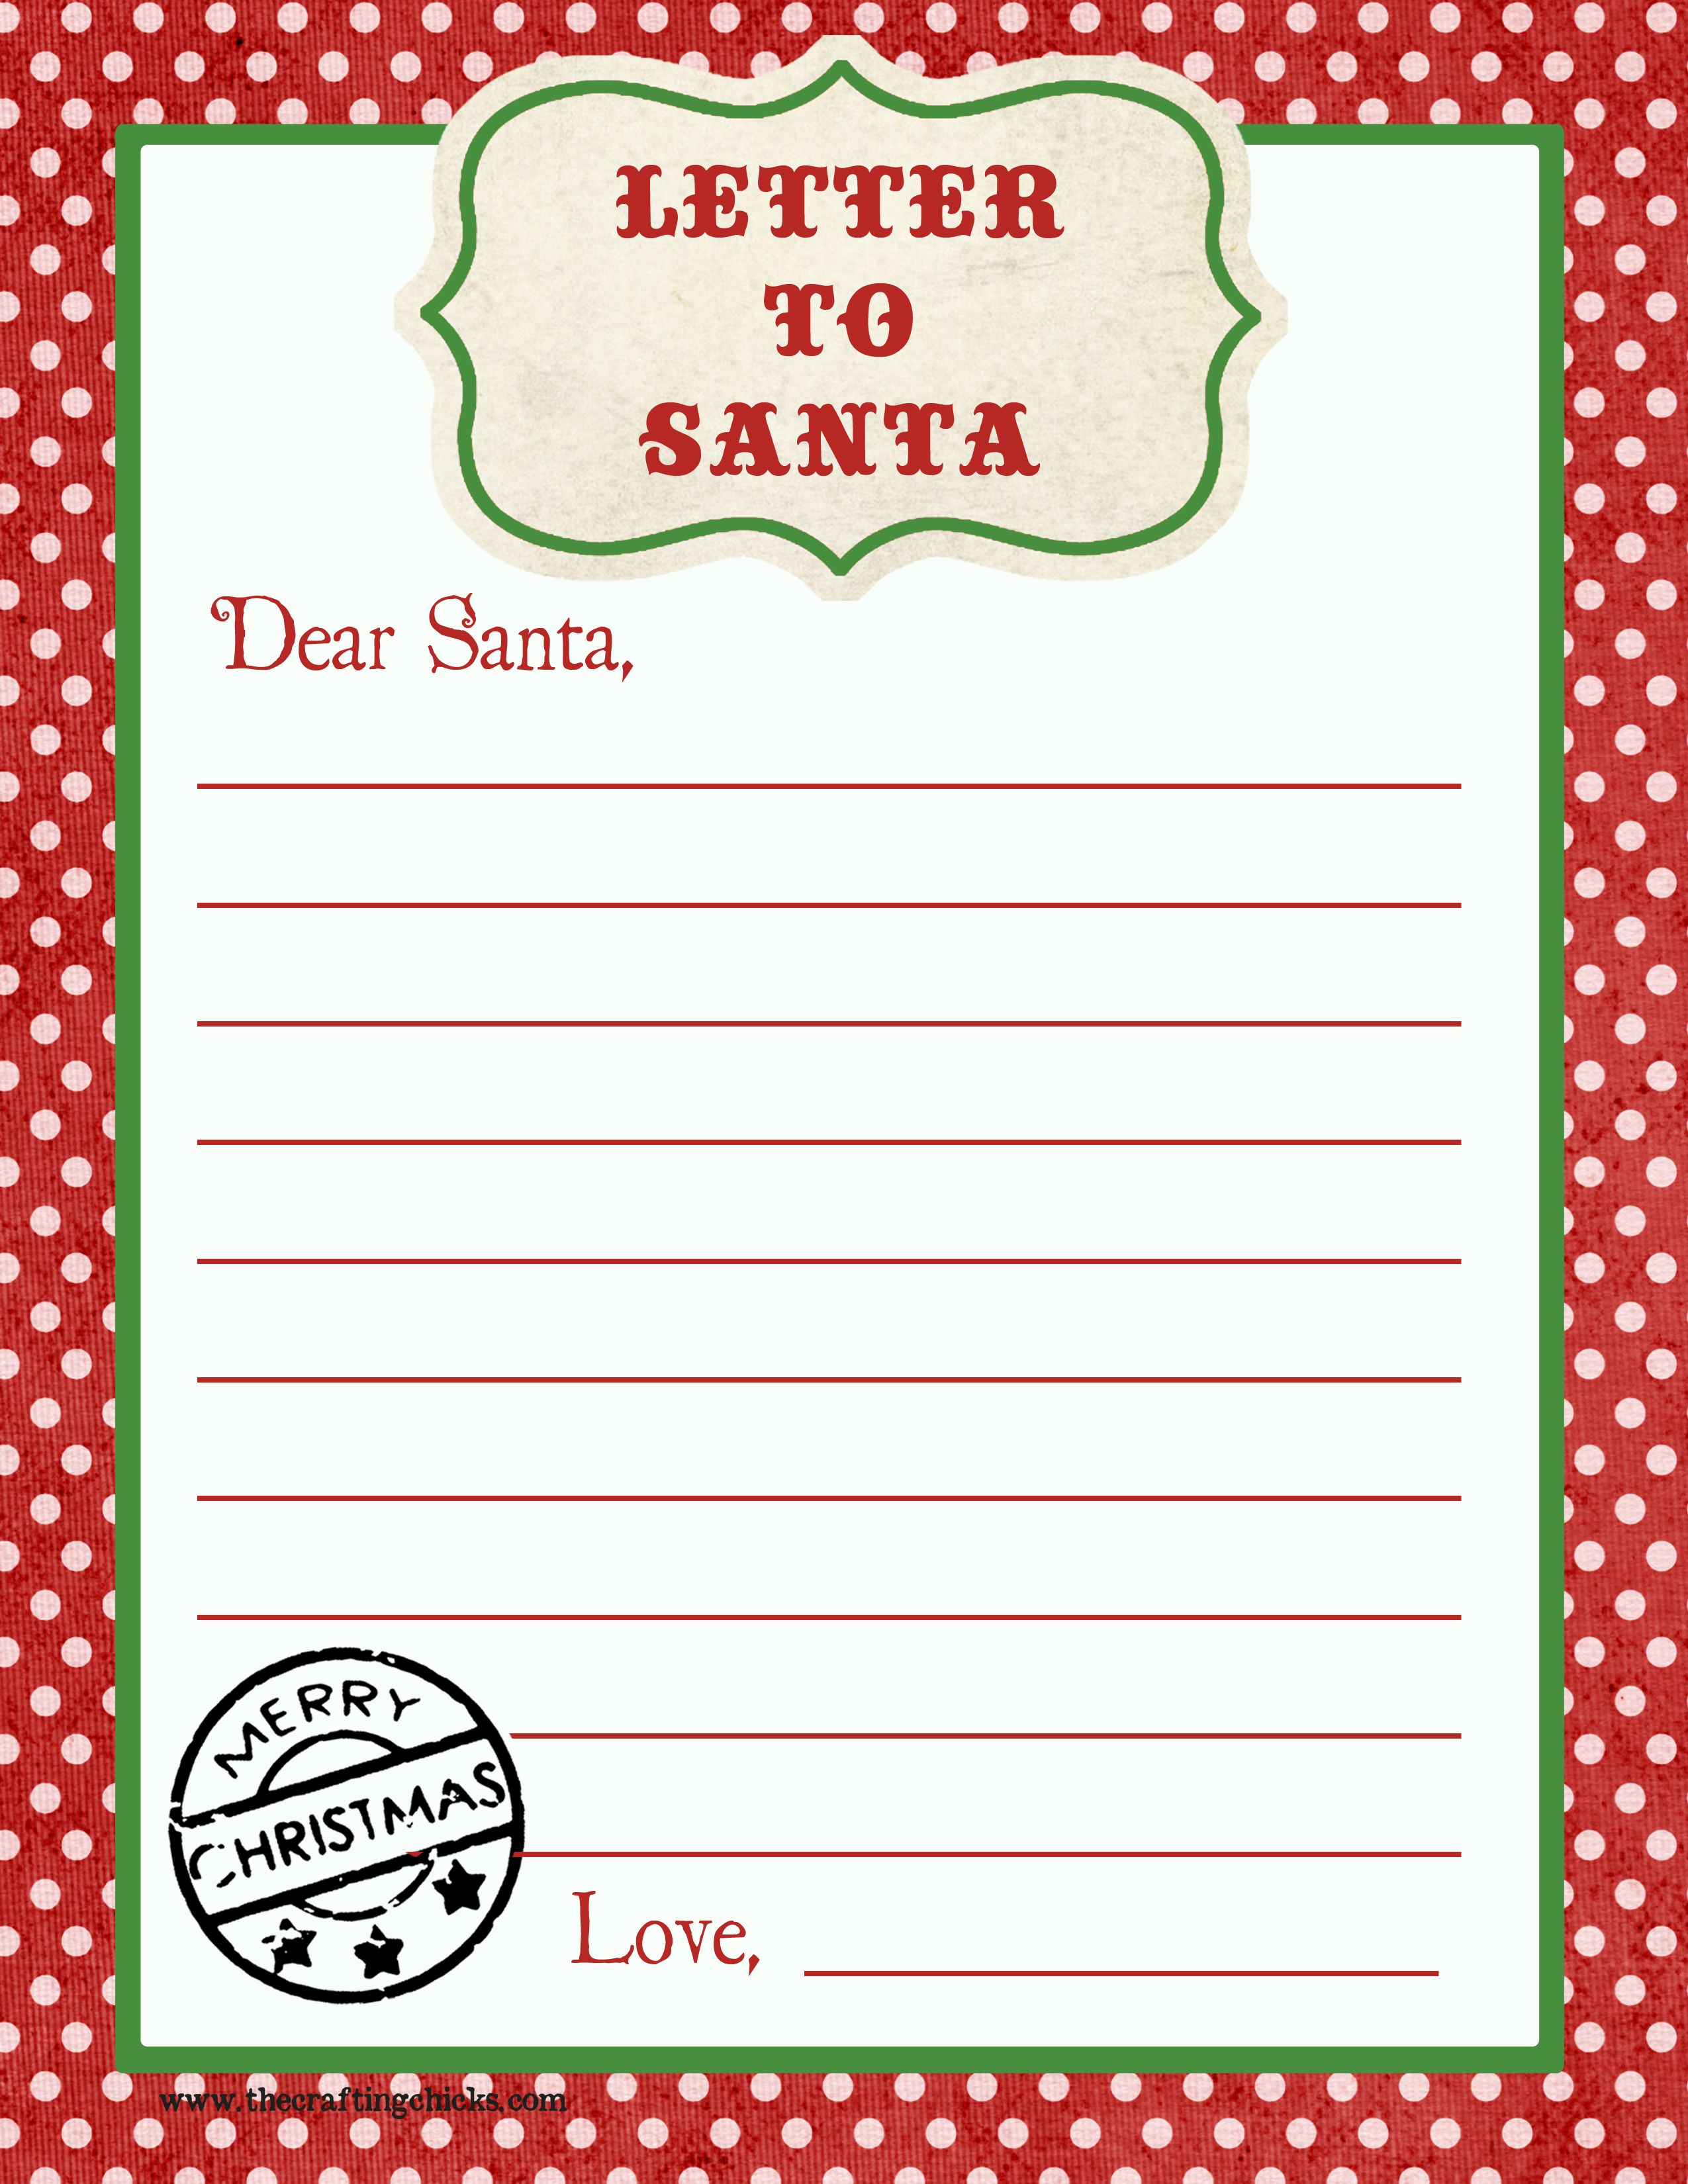 Free Printable Letter From Santa Template - Letter to Santa Free Printable Download